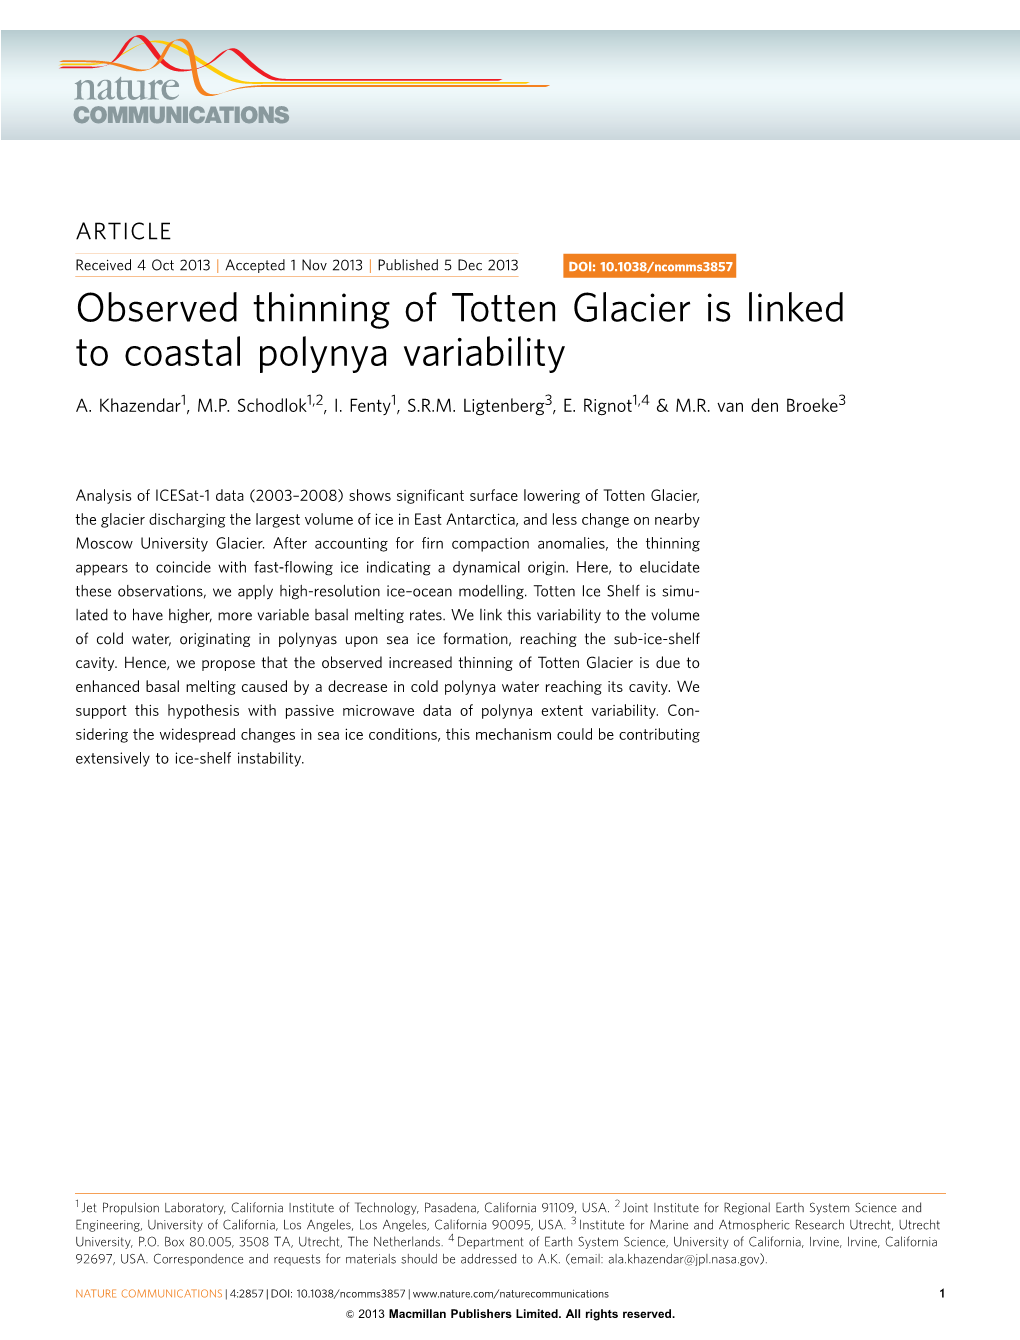 Observed Thinning of Totten Glacier Is Linked to Coastal Polynya Variability